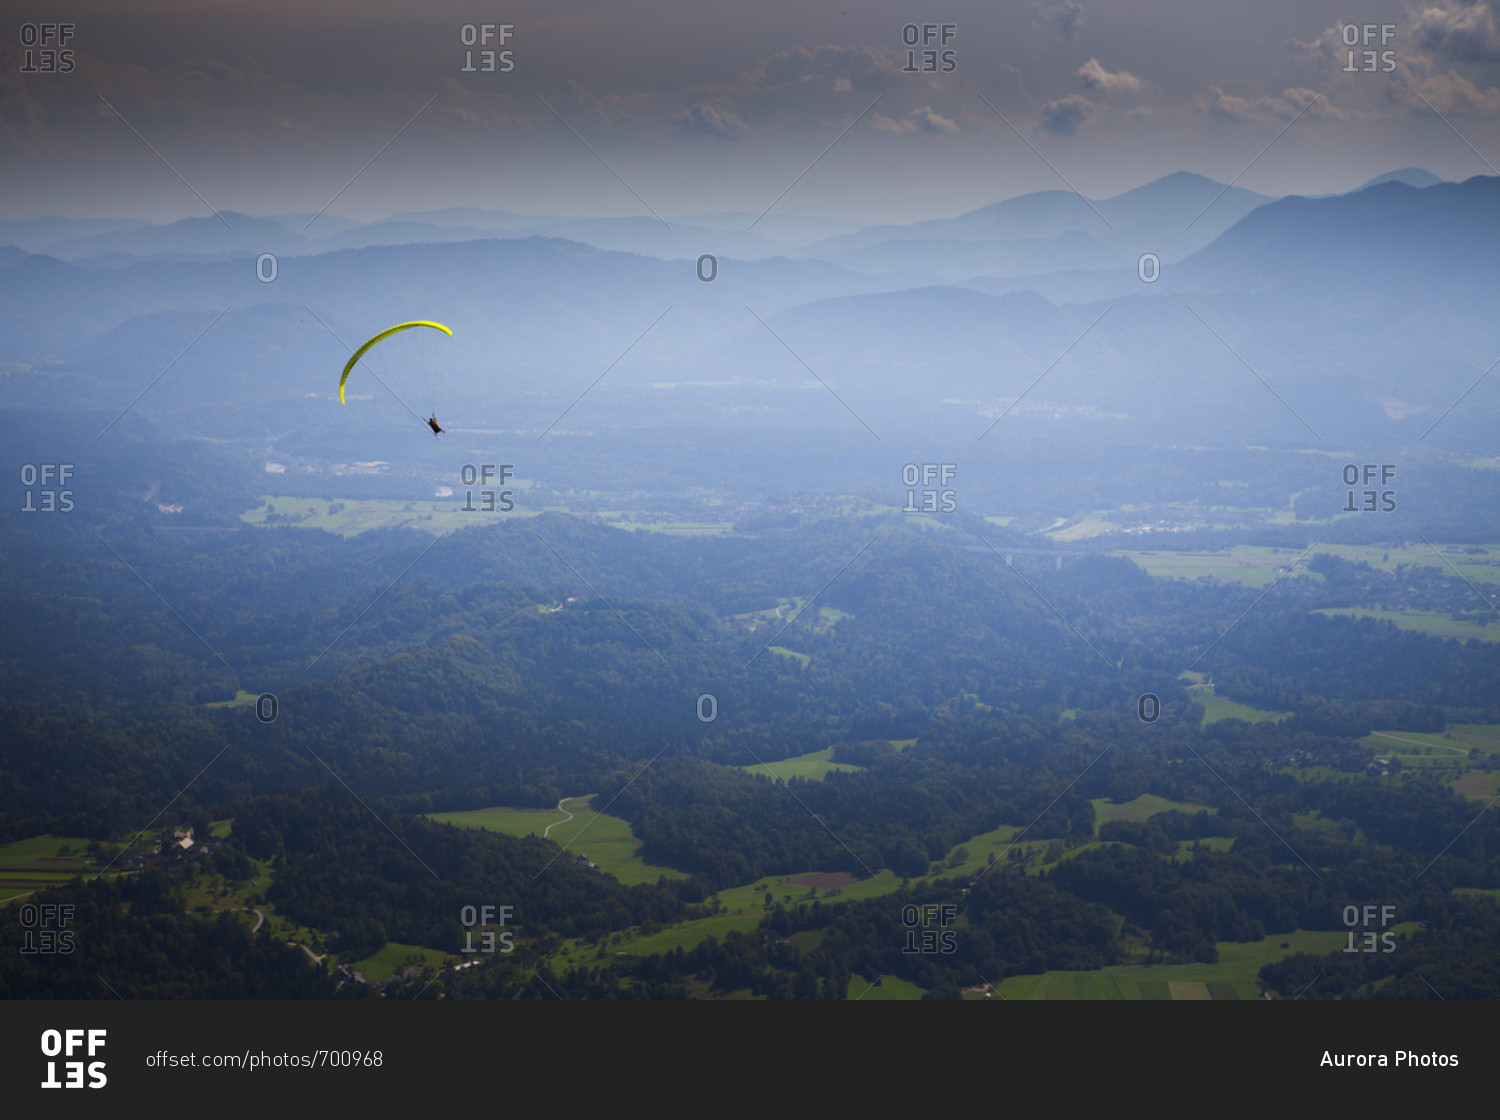 Distant view of a paraglider flying high above the mountain valley of Begunje and Radovljica, after taking off from Dobrca mountain, Upper Carniola, Slovenia